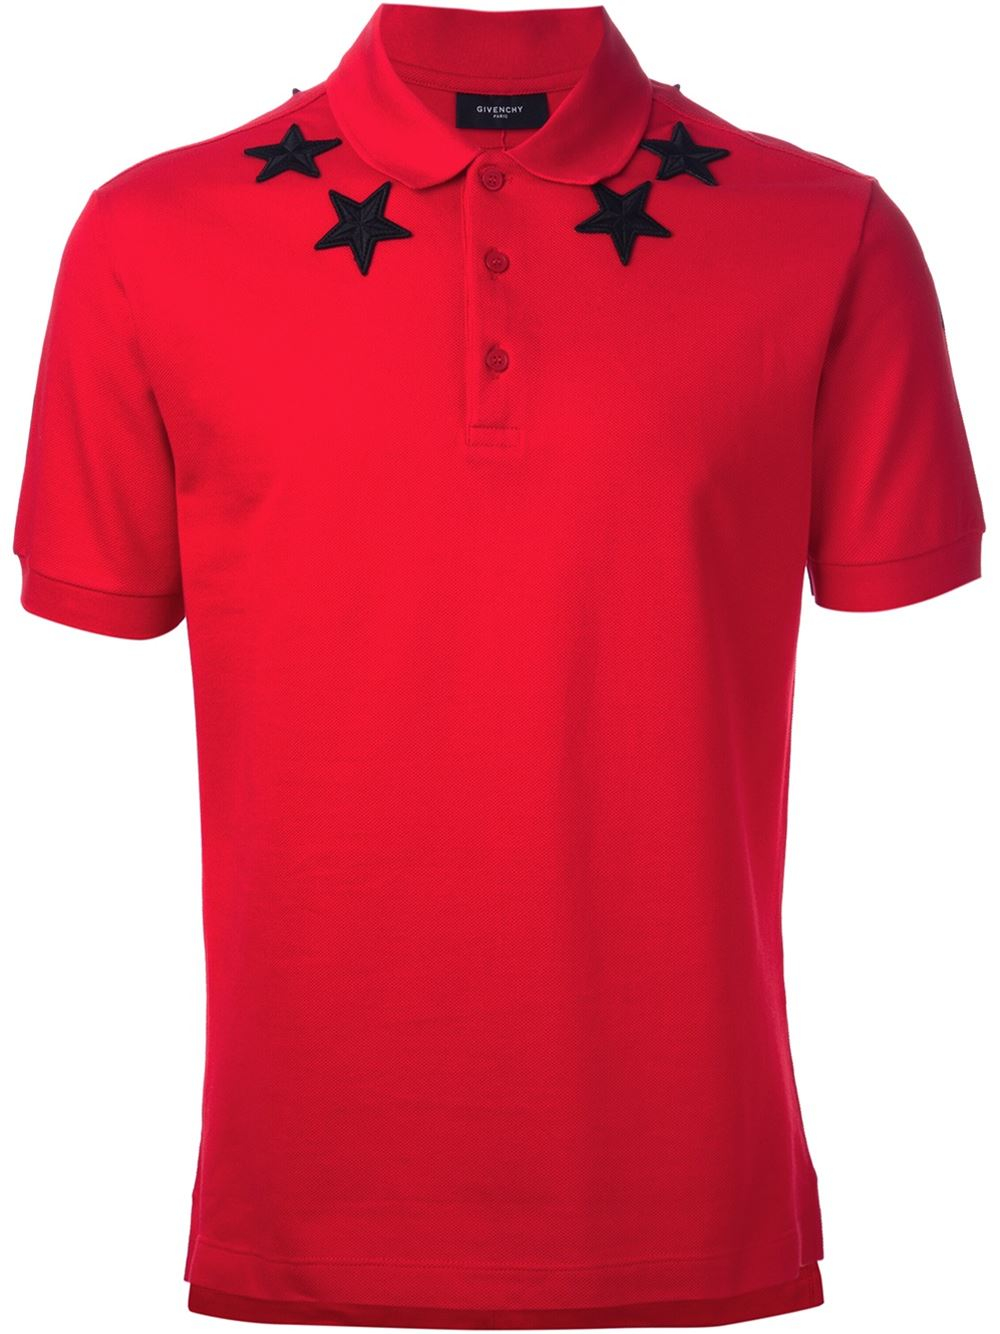 Lyst - Givenchy Polo Shirt in Red for Men